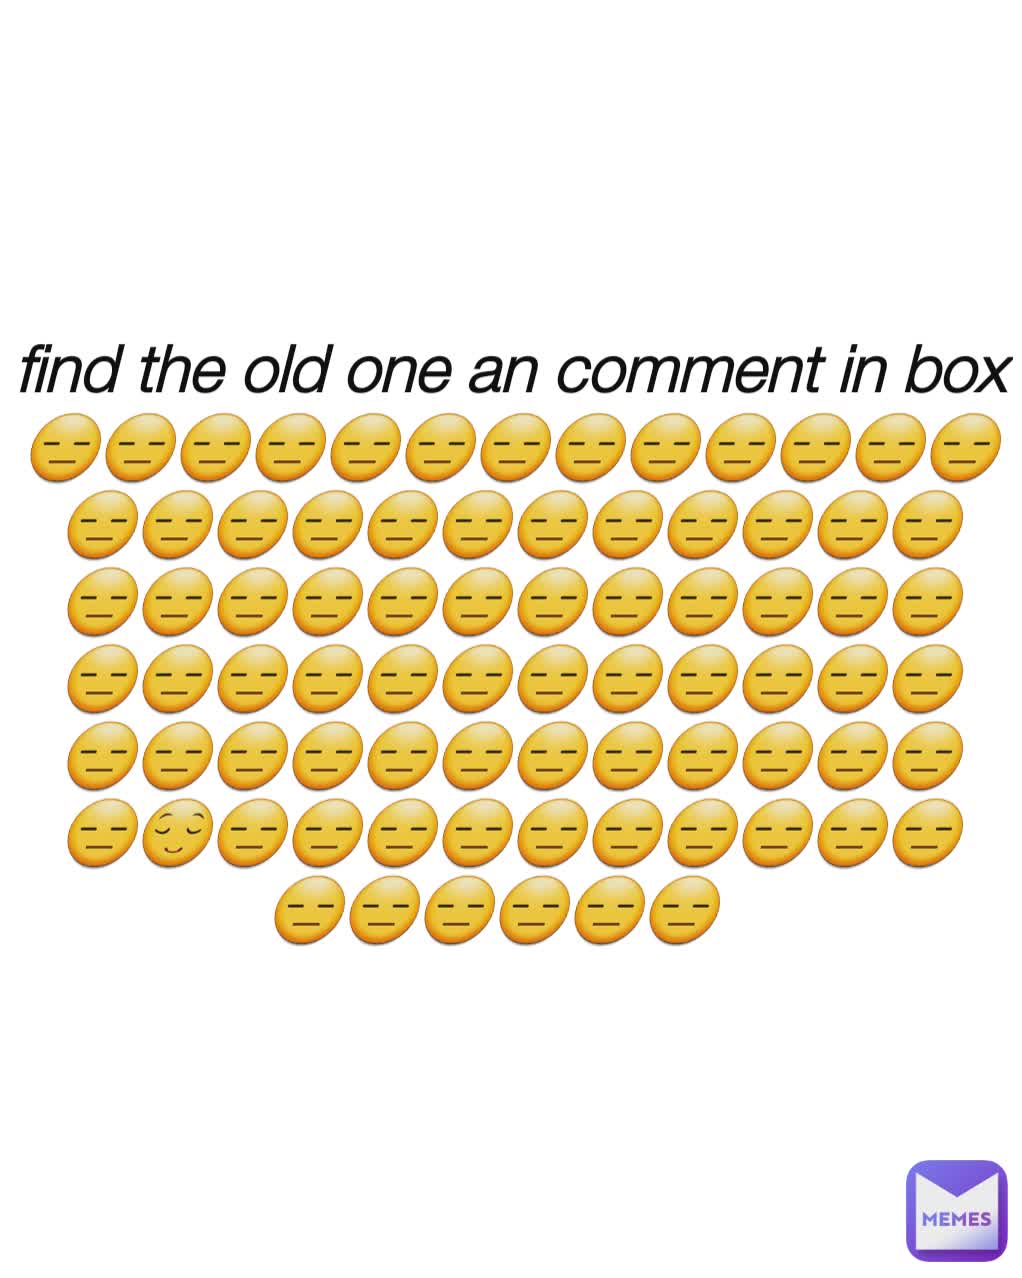 find the old one an comment in box😑😑😑😑😑😑😑😑😑😑😑😑😑😑😑😑😑😑😑😑😑😑😑😑😑😑😑😑😑😑😑😑😑😑😑😑😑😑😑😑😑😑😑😑😑😑😑😑😑😑😑😑😑😑😑😑😑😑😑😑😑😑😌😑😑😑😑😑😑😑😑😑😑😑😑😑😑😑😑